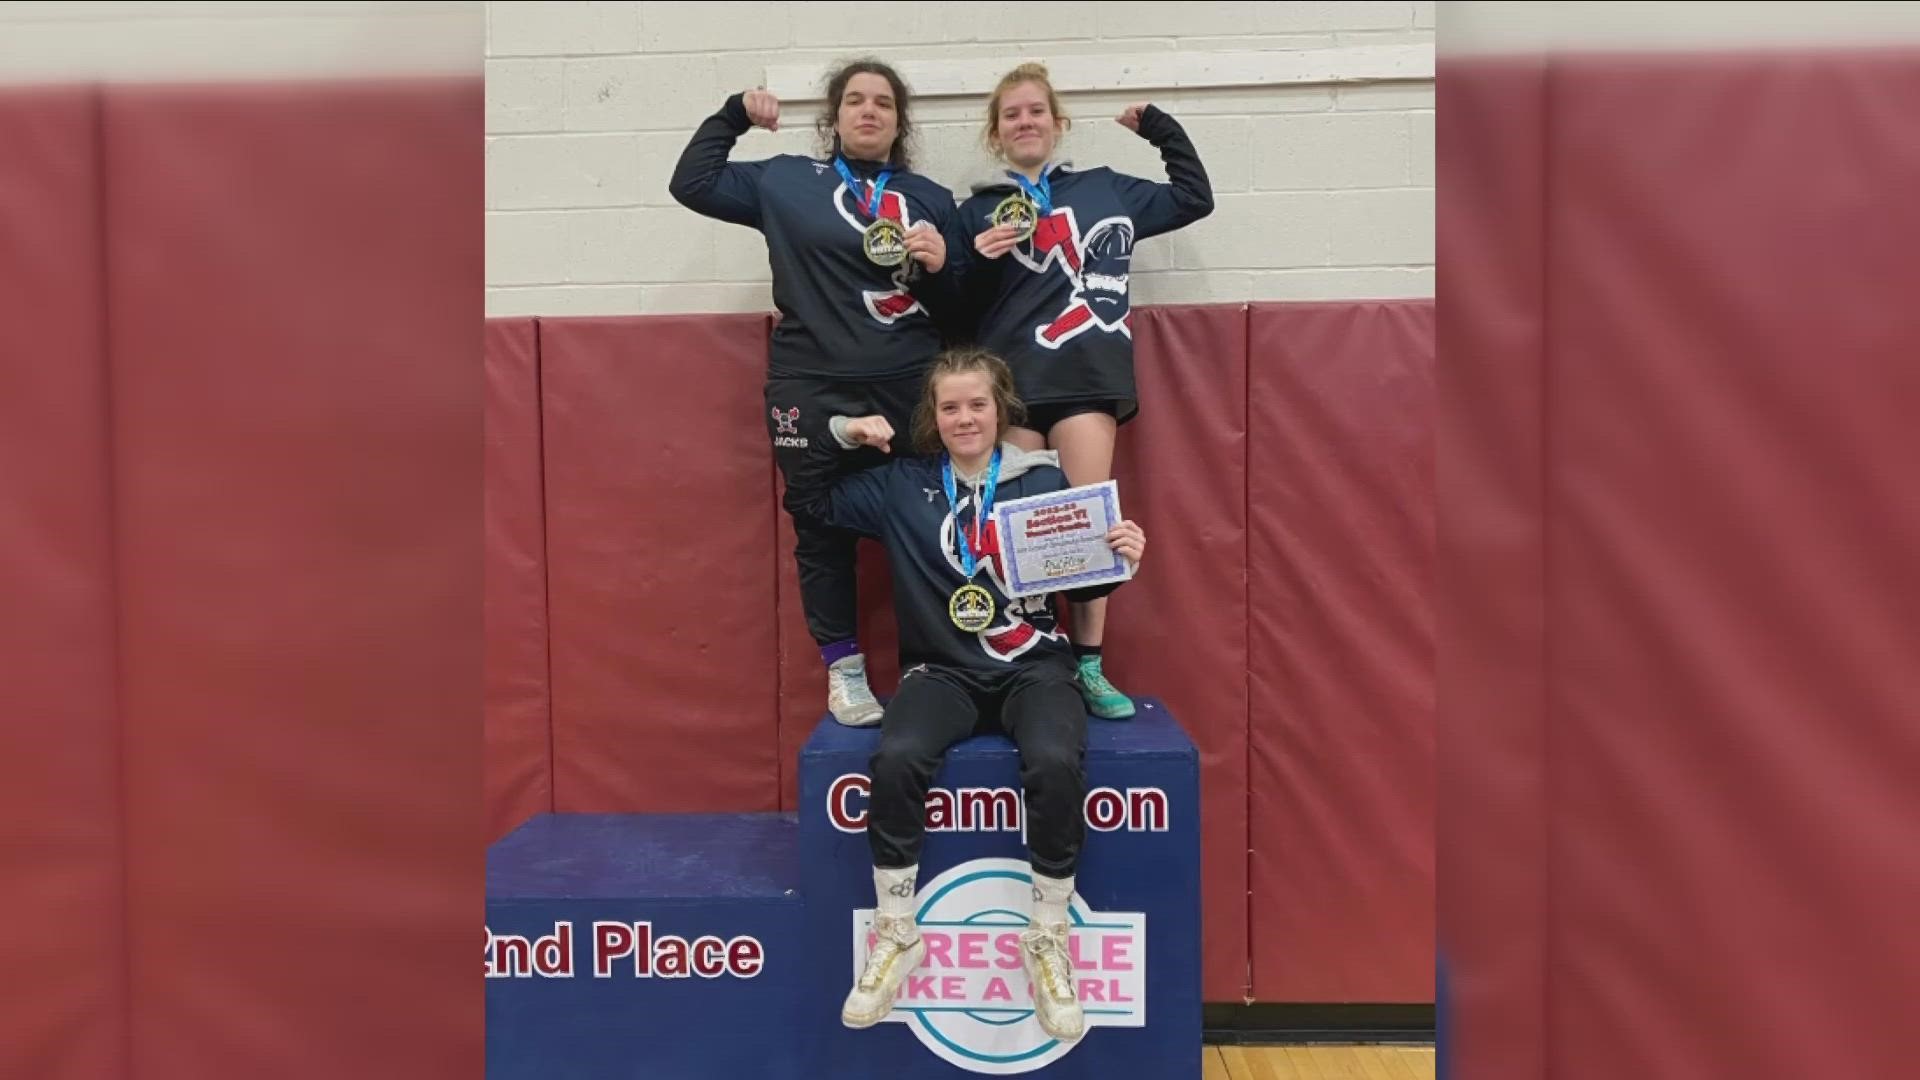 Girls wrestling has become an emerging sport across the nation, and 3 juniors at North Tonawanda High School have recently enjoyed a lot of success.